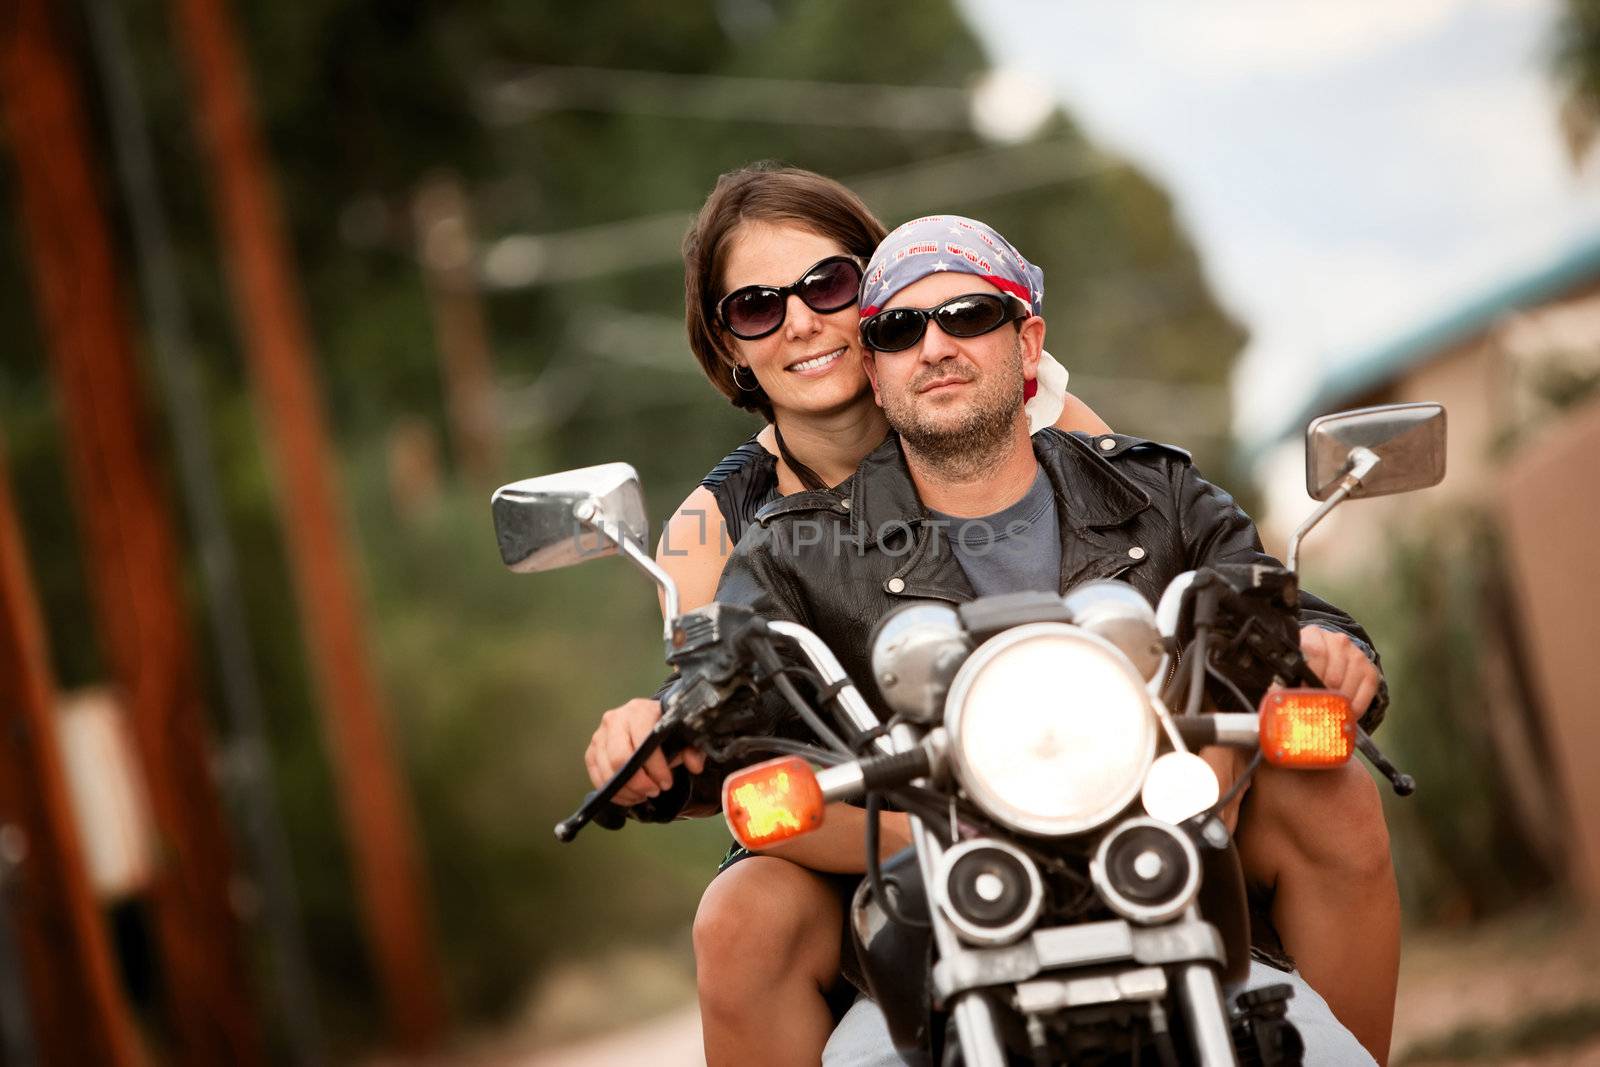 Man and Woman on Motorcycle by Creatista